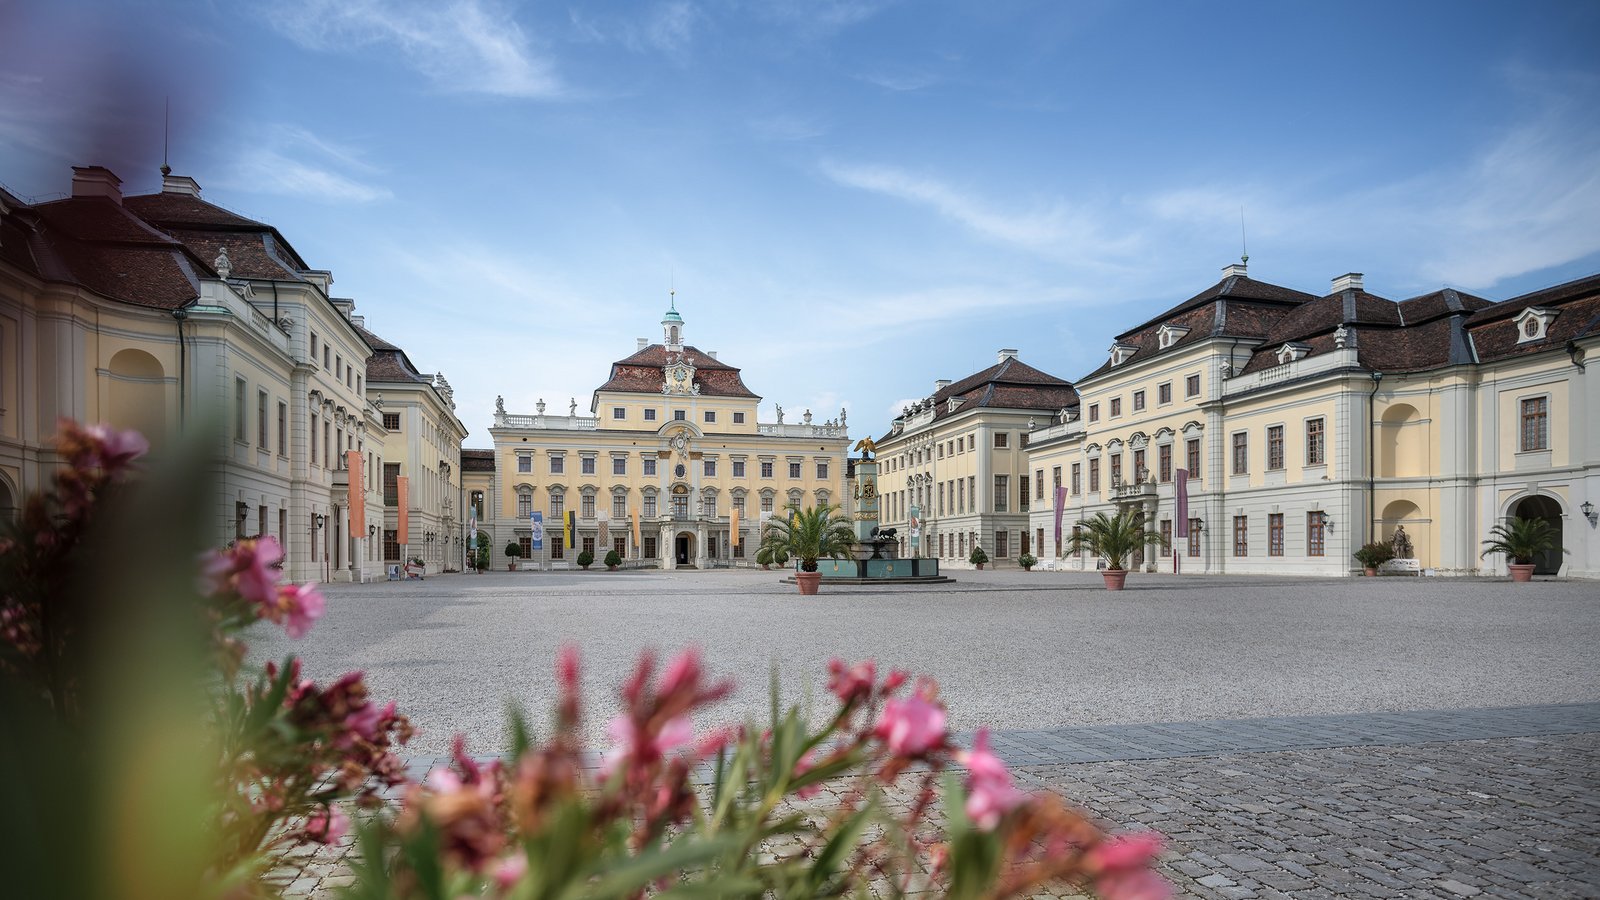 Das Schloss in Ludwigsburg.  Foto: Guenther Bayerl/SSG